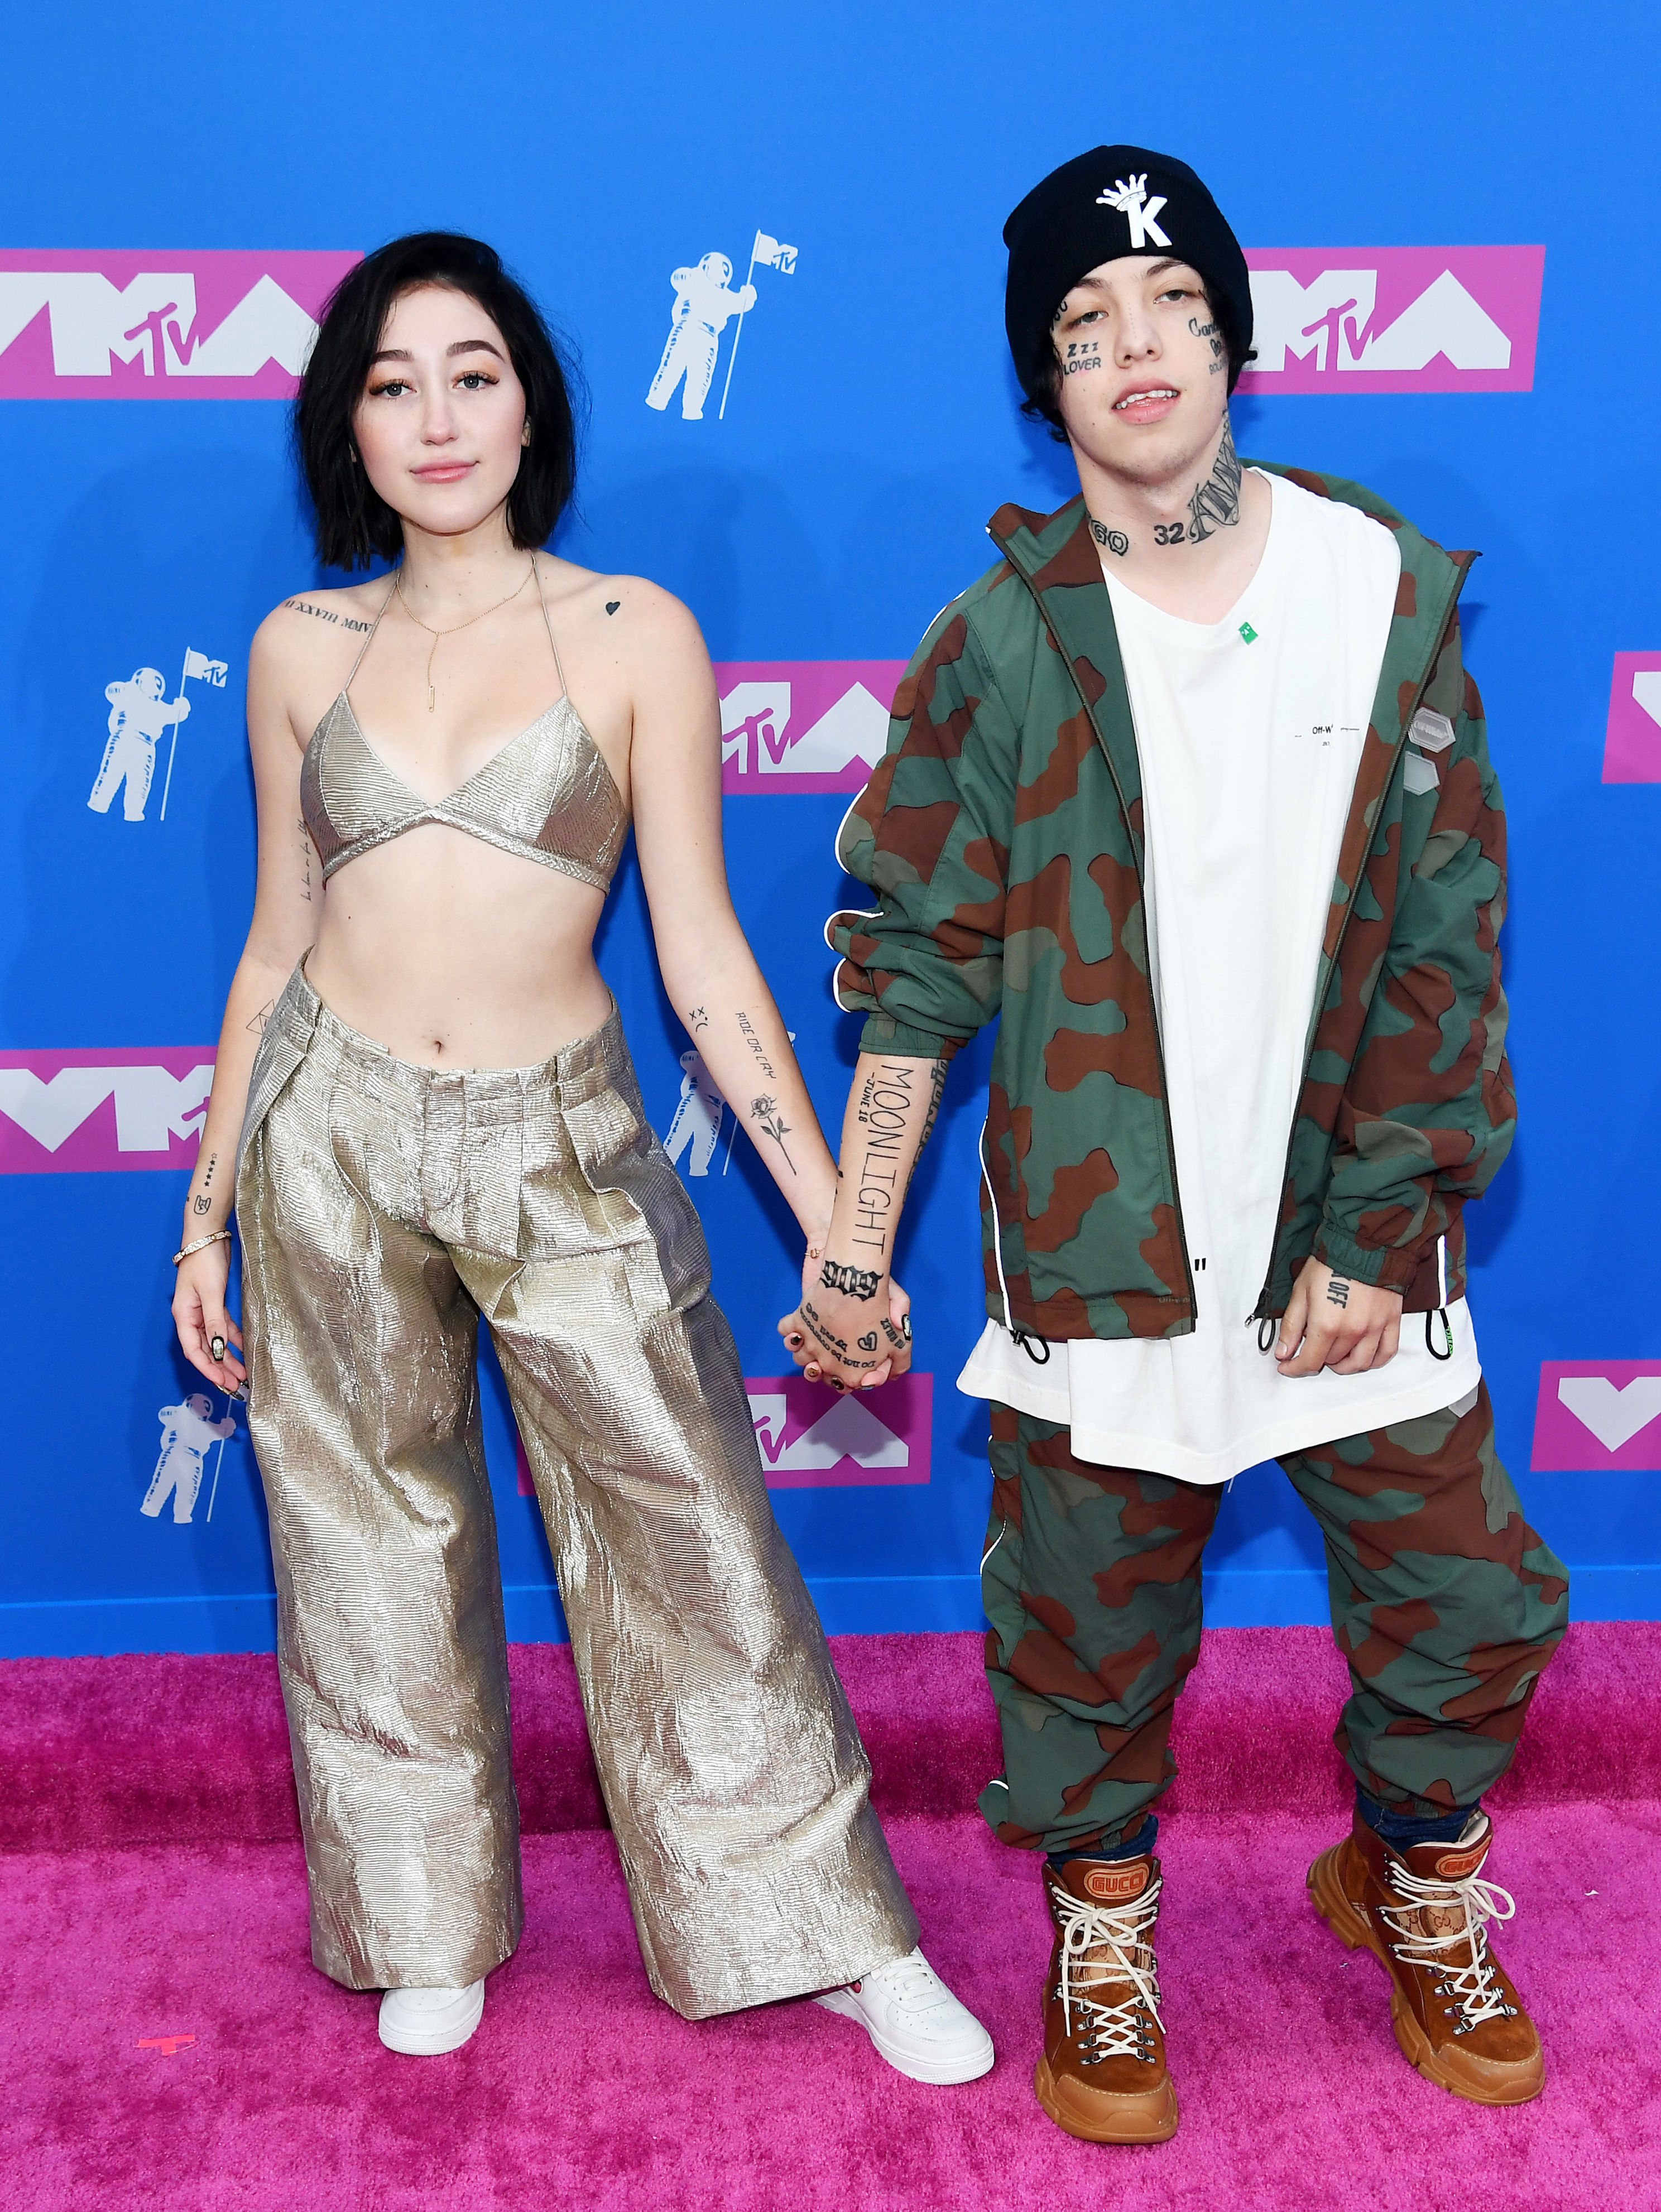 <p>Noah Cyrus and Lil Xan called it quits in 2018 after they accused one another of cheating. In September of that year, the rapper took to Instagram to tell his followers that he felt like he was "probably being cheated on." The "July" songstress, meanwhile, alleged that it was actually the rapper who cheated on her -- not the other way around. Noah claimed she saw what looked like a hickey on Lil Xan's neck. "He told me it was just a bruise and I decided to give him the benefit of the doubt," she said. "Cheaters like to accuse their partners of cheating to make themselves feel less guilt."</p>